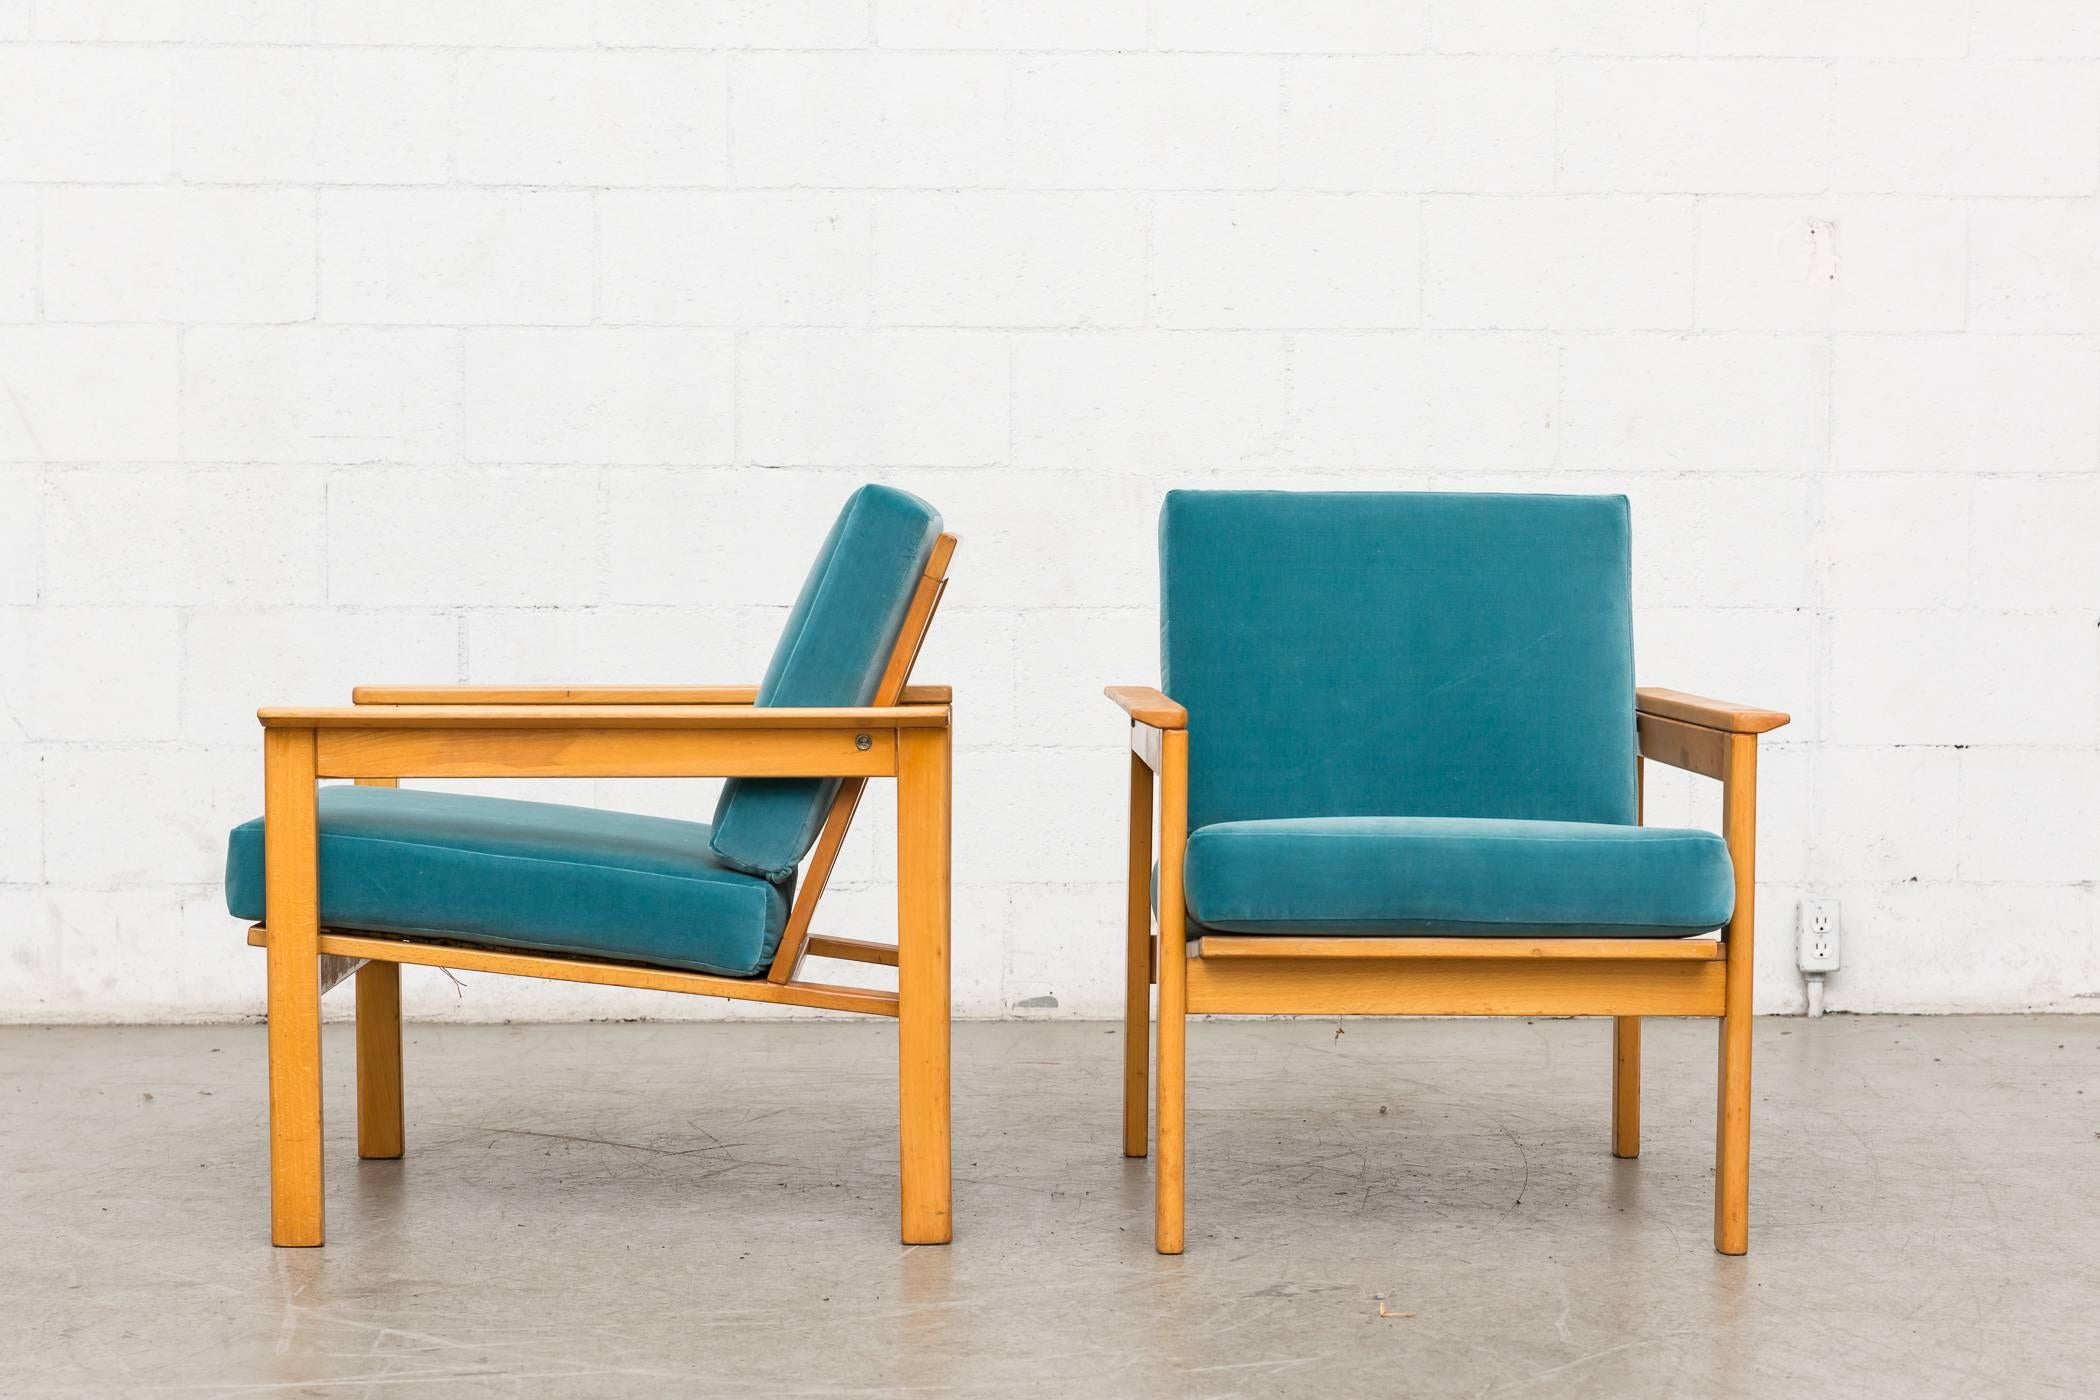 Handsome pair of pair of lightly refinished midcentury blonde slat back lounge chairs with new turquoise velvet upholstered cushions. Good original condition. Set price.